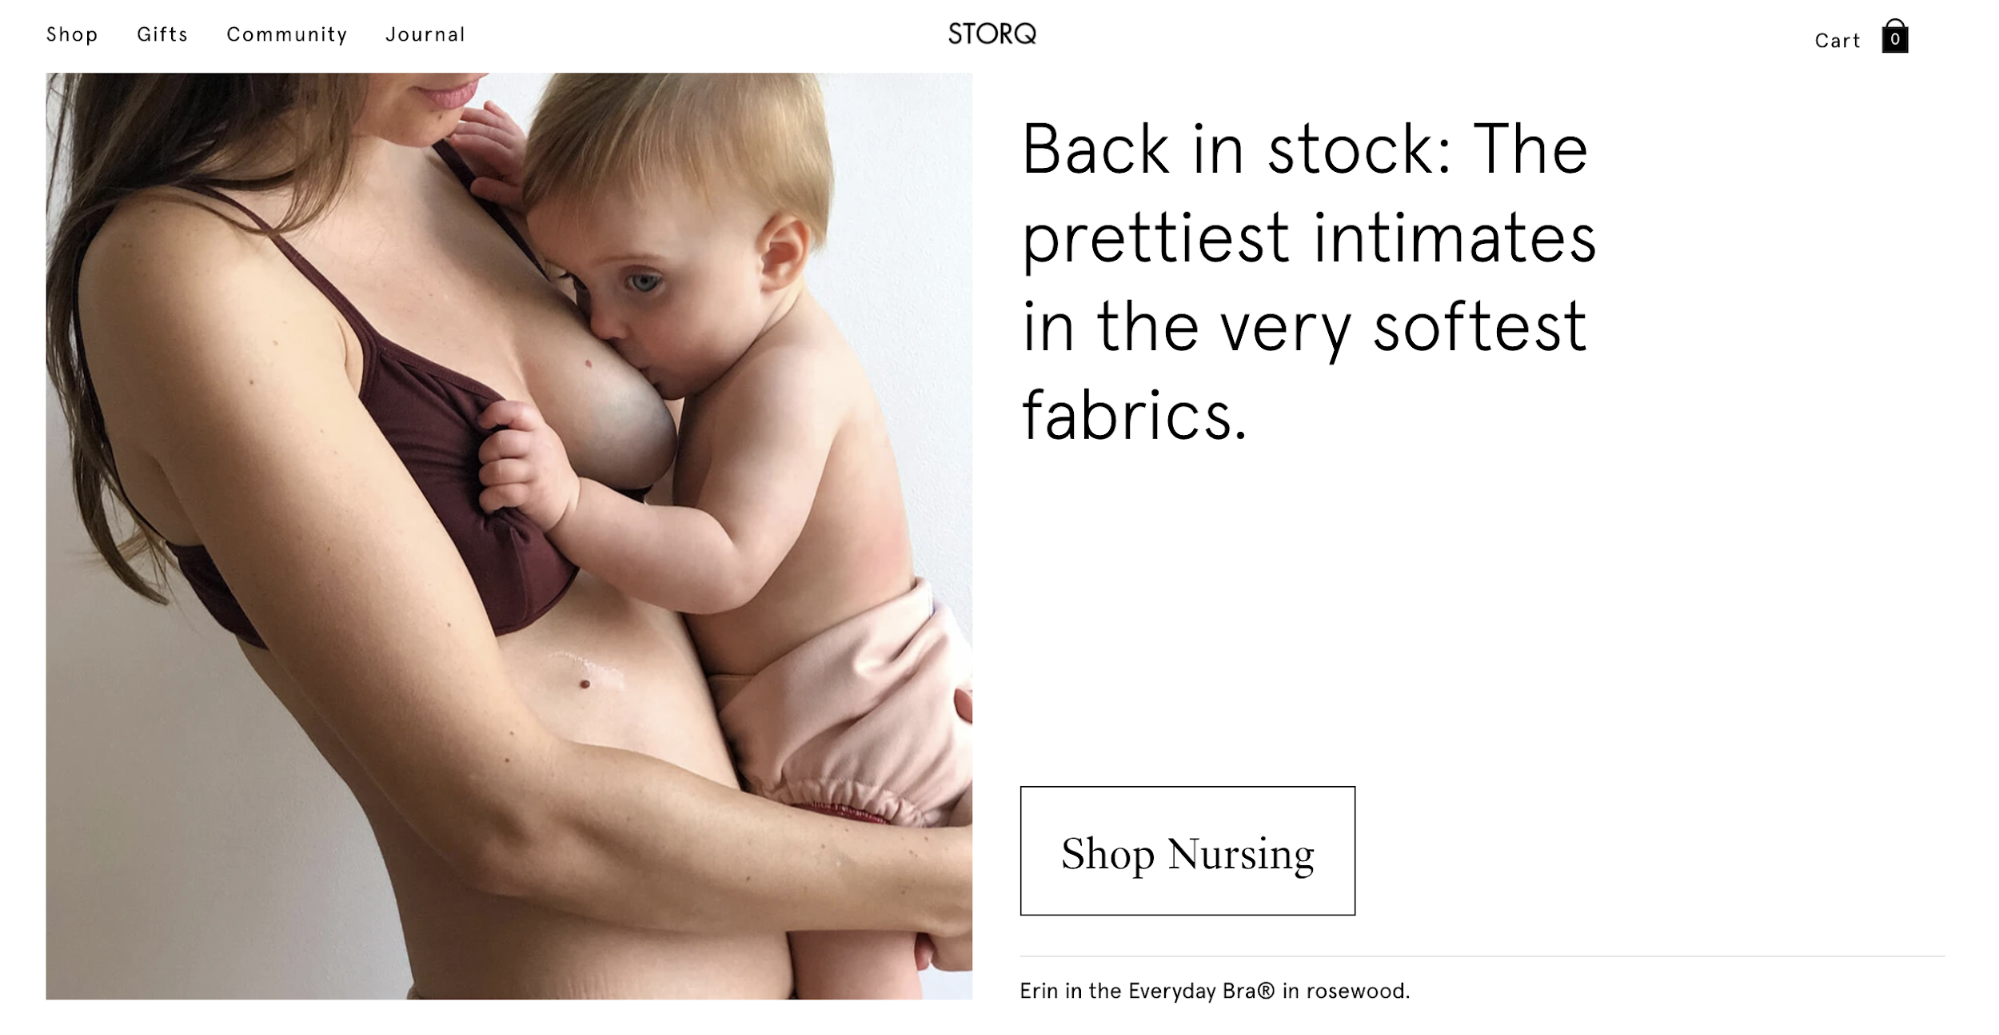 Storq homepage with a person breastfeeding a baby wearing Storq clothing